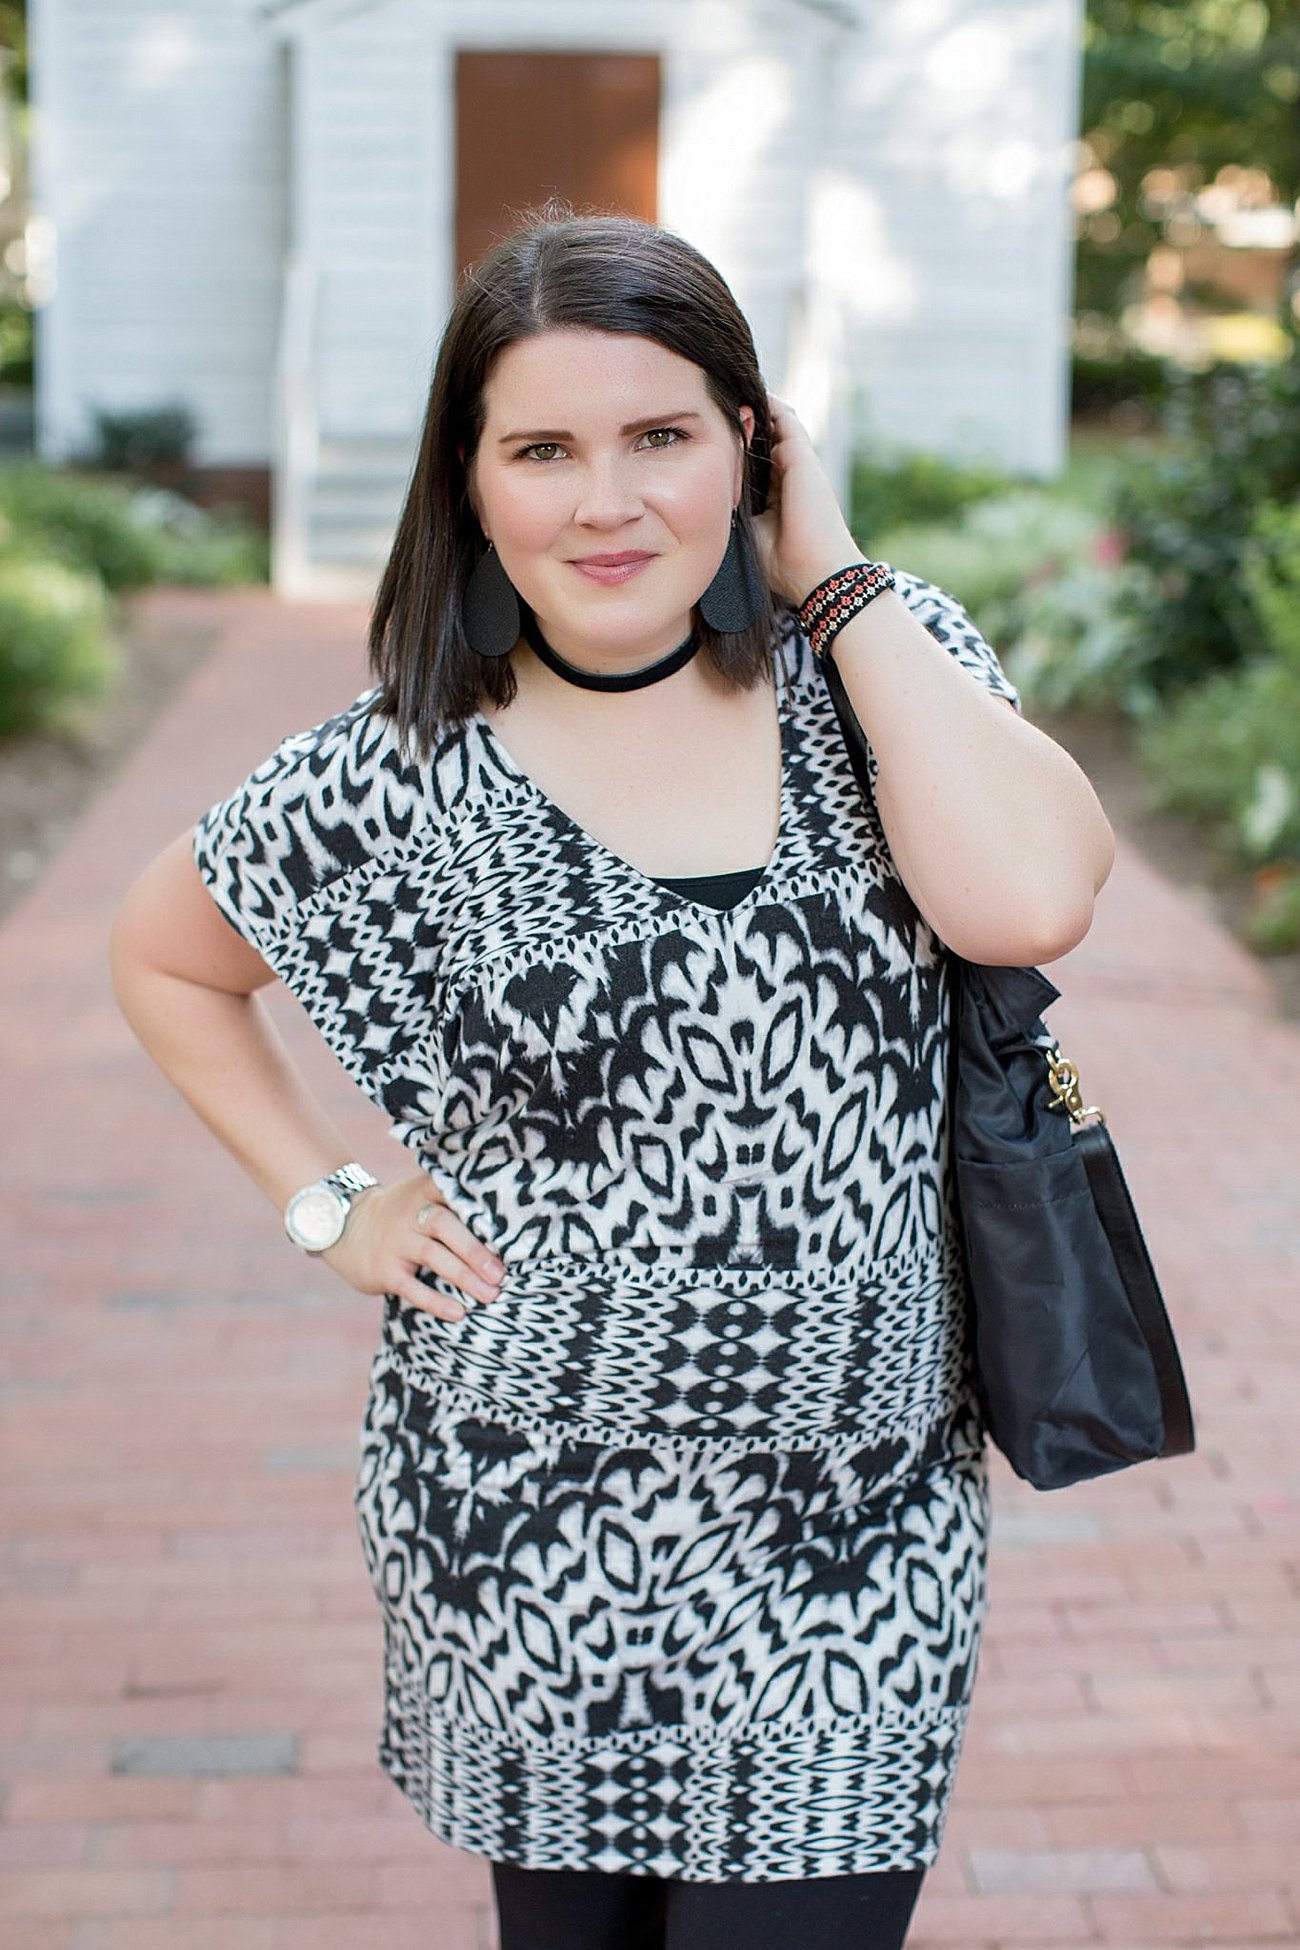 Threads for Thought "Mia Dress", LulaRoe black leggings, Lily Jade diaper bag, Nickel & Suede choker, Nickel & Suede earrings, Darzah stitched leather cuff | ethical fashion blogger, north carolina fashion blogger (11)